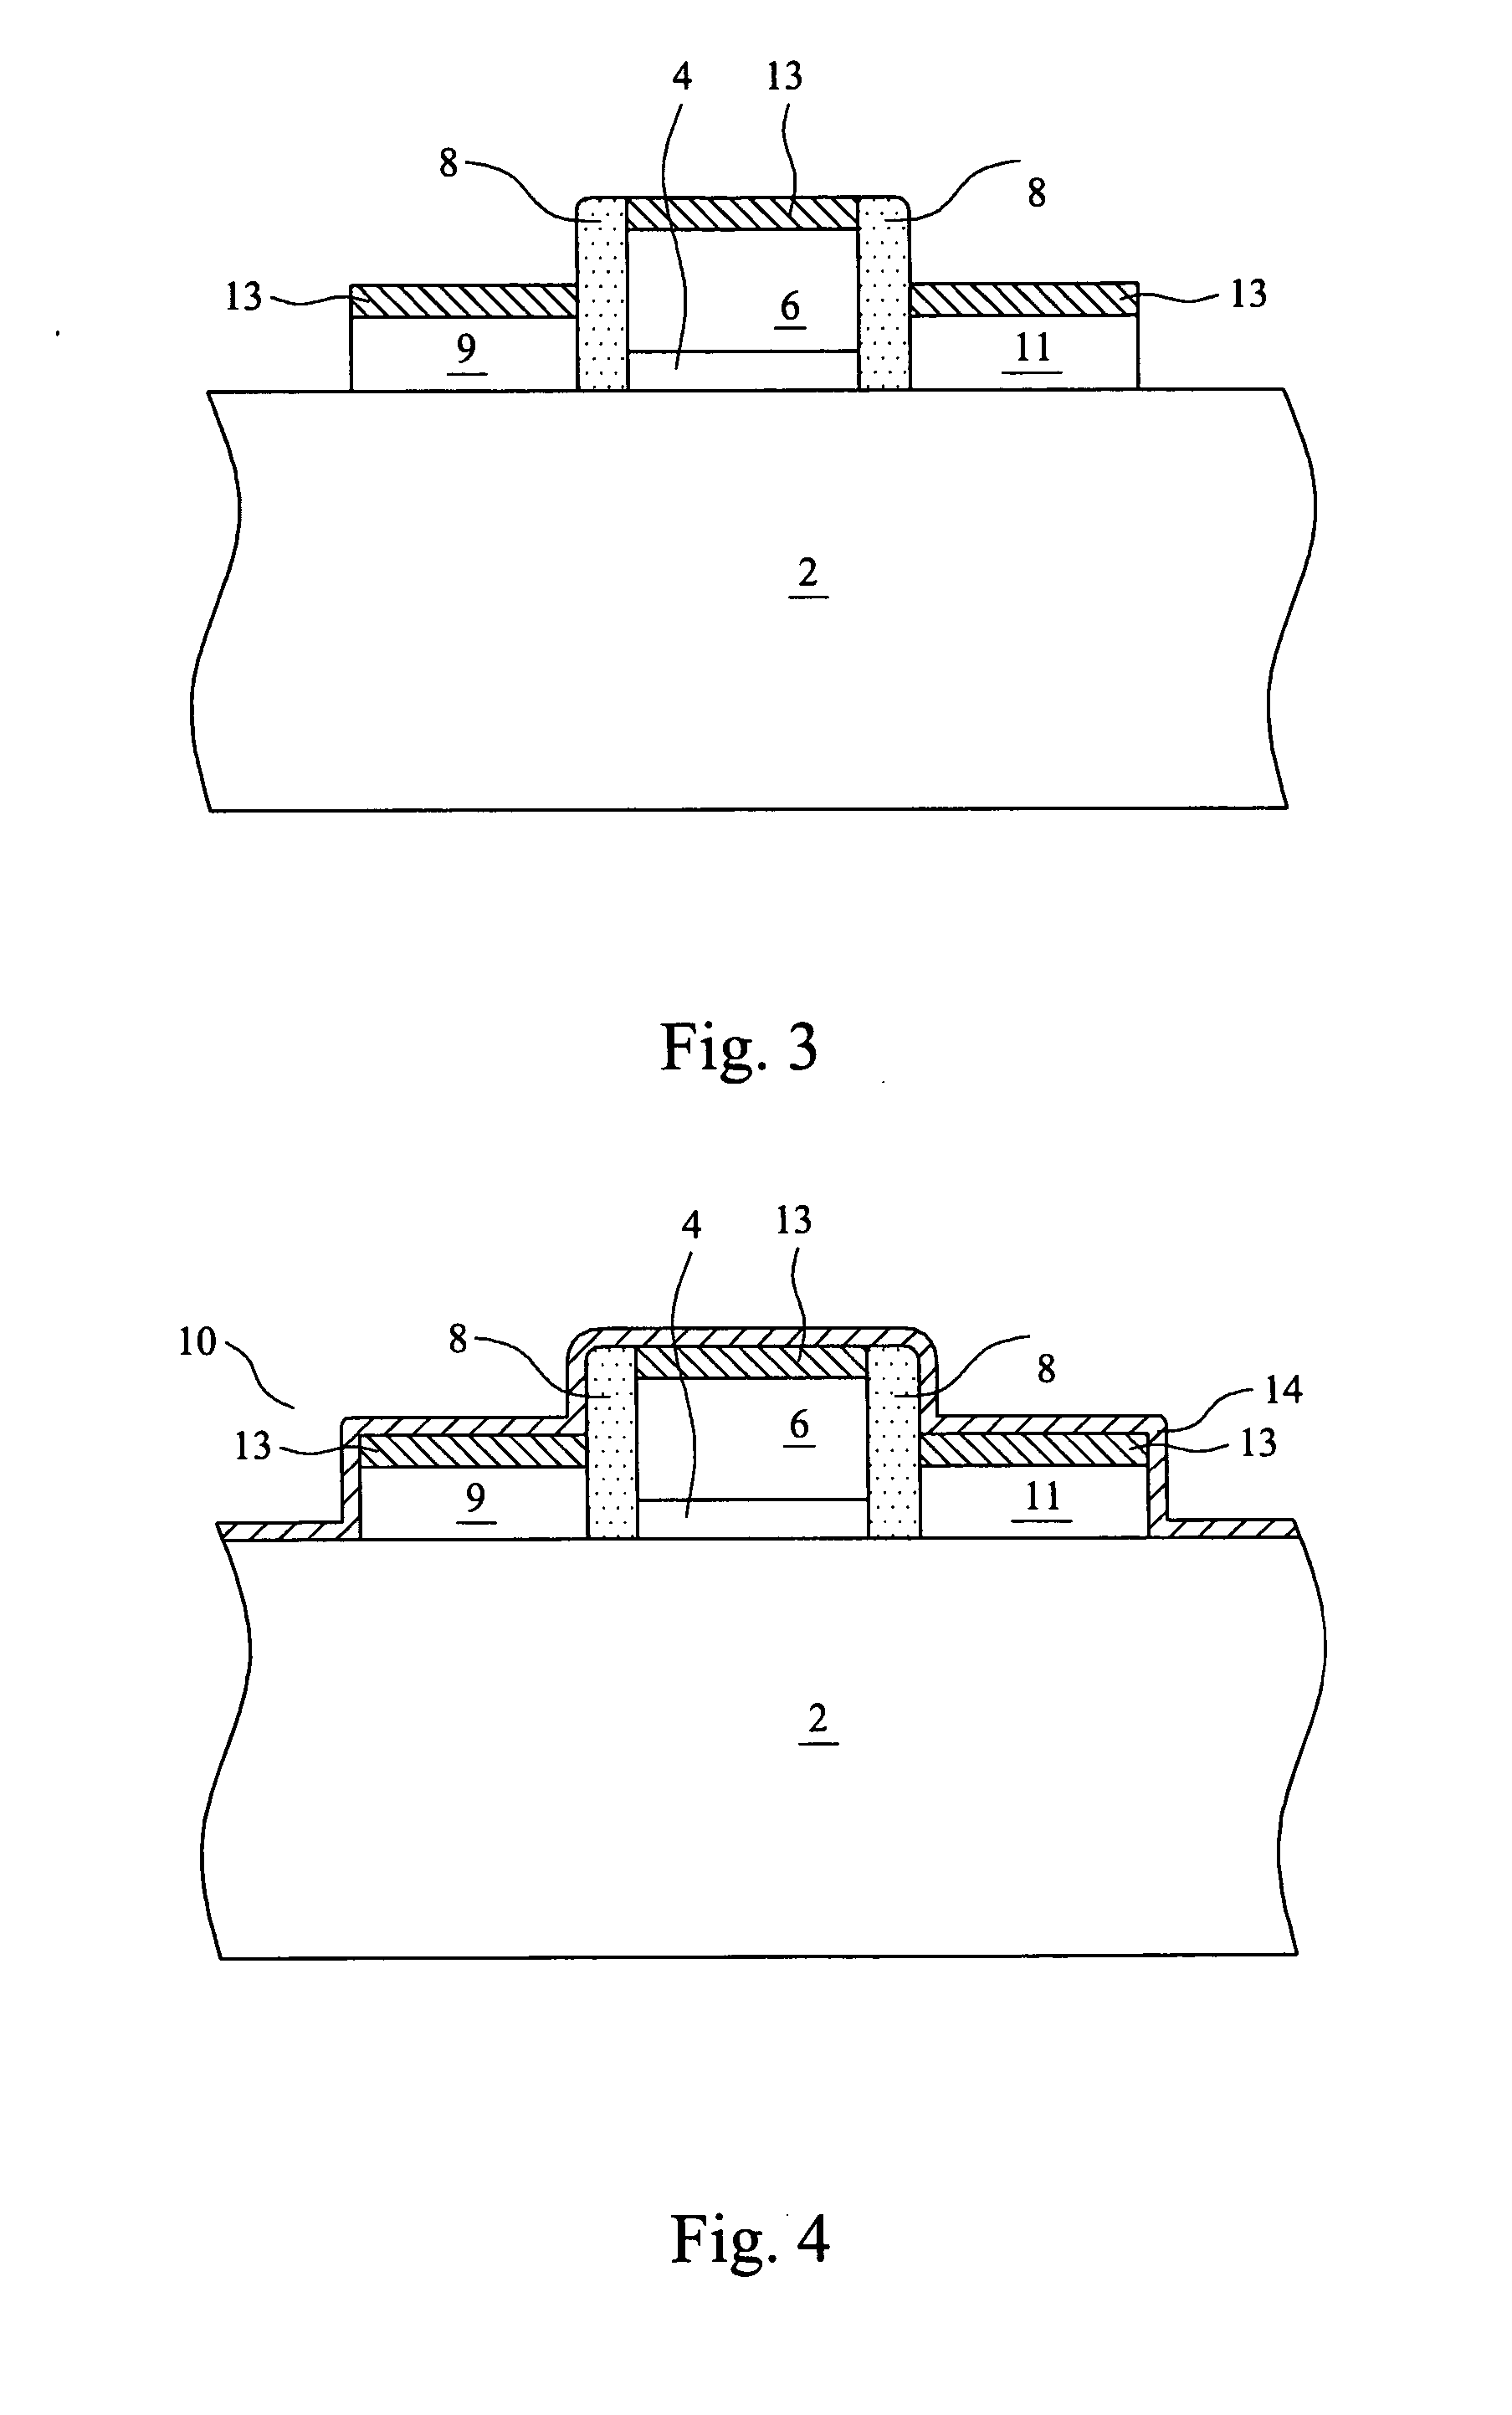 Silicon oxycarbide and silicon carbonitride based materials for MOS devices